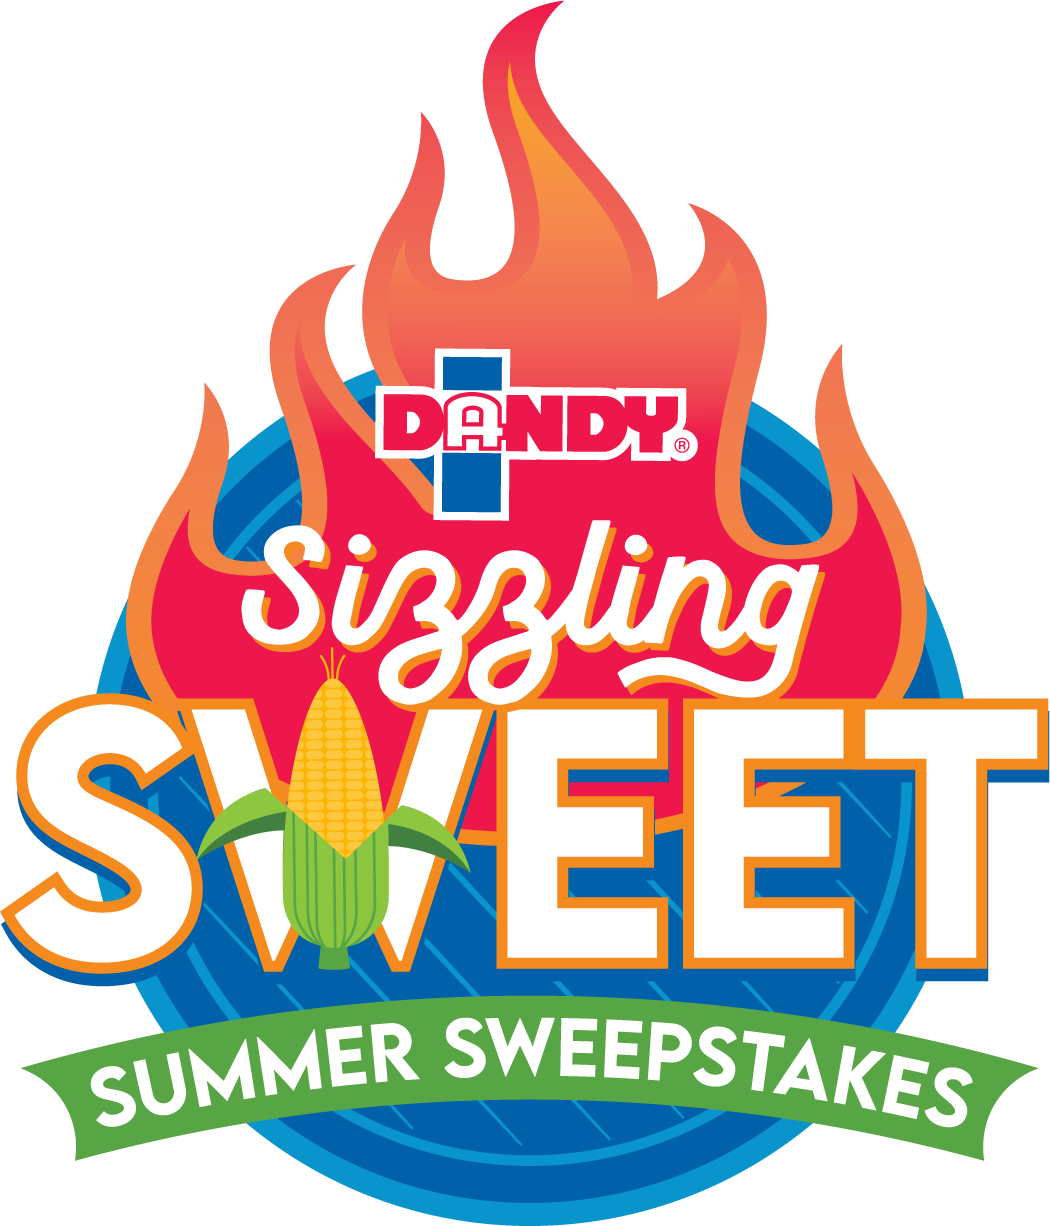 DANDY Sizzling Sweet Summer Sweepstakes